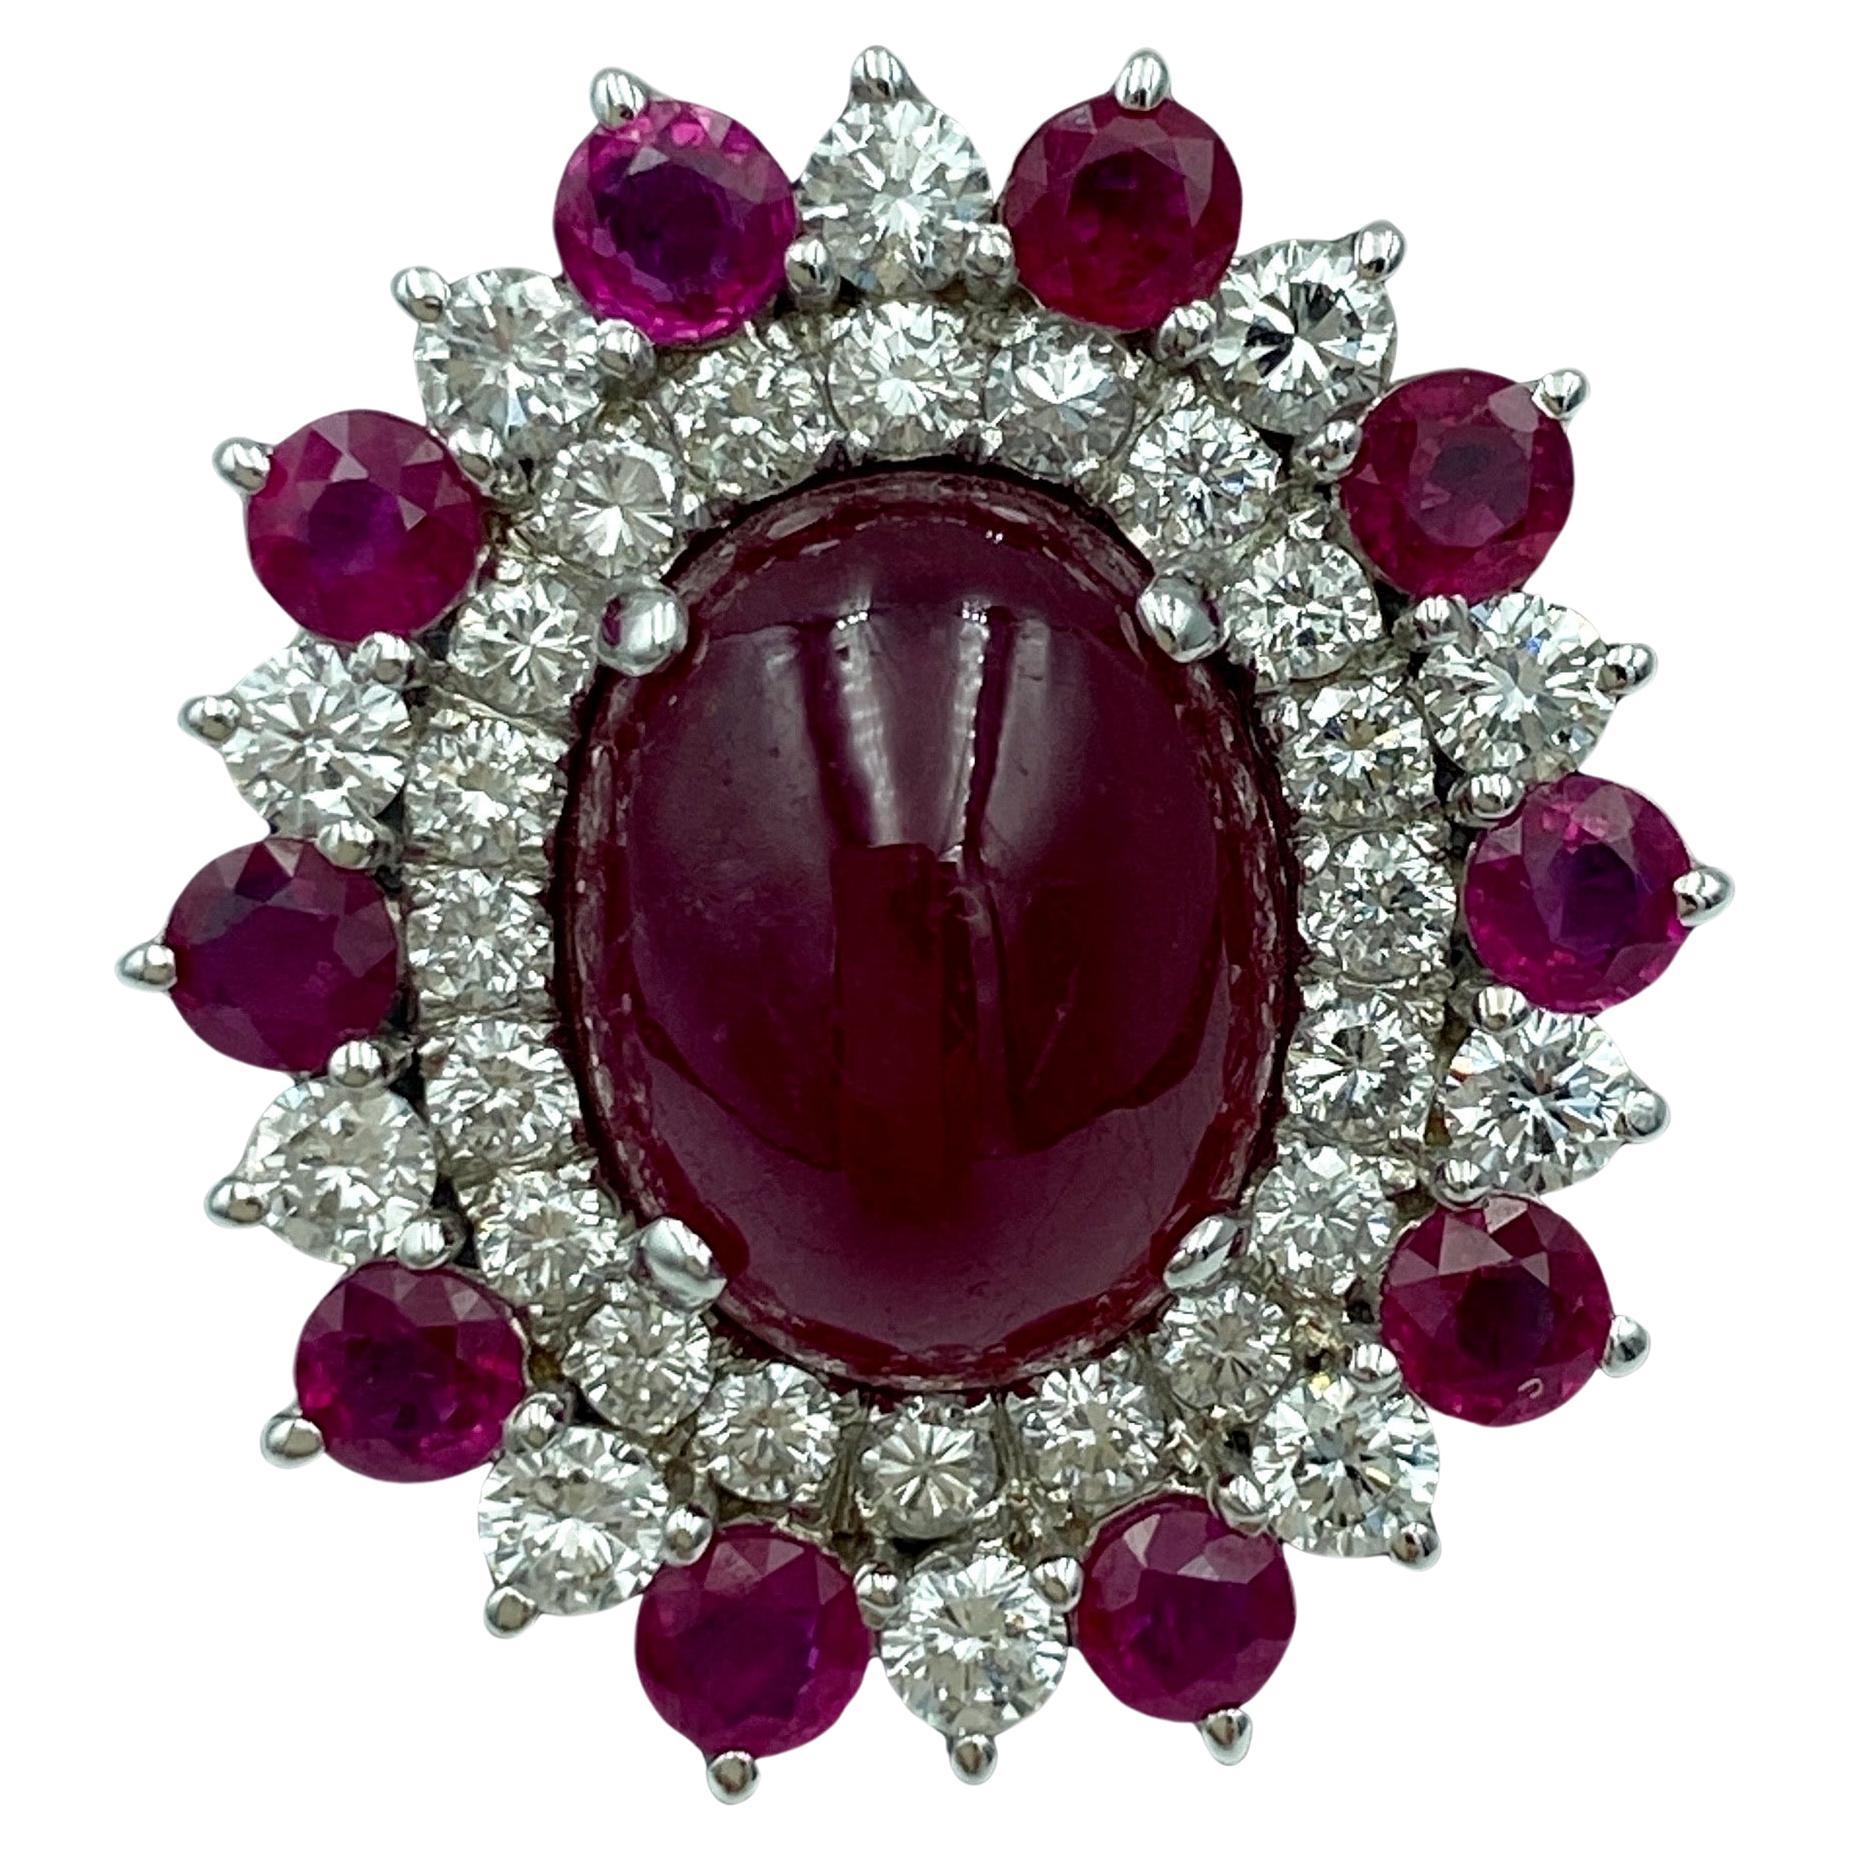 This outstanding natural cabochon ruby ring adorned with approximately 2 carats of VS quality F-G colour round cut diamonds is a stunning piece. The ring is part of a striking set with matching earrings, a photograph of which is given below. The